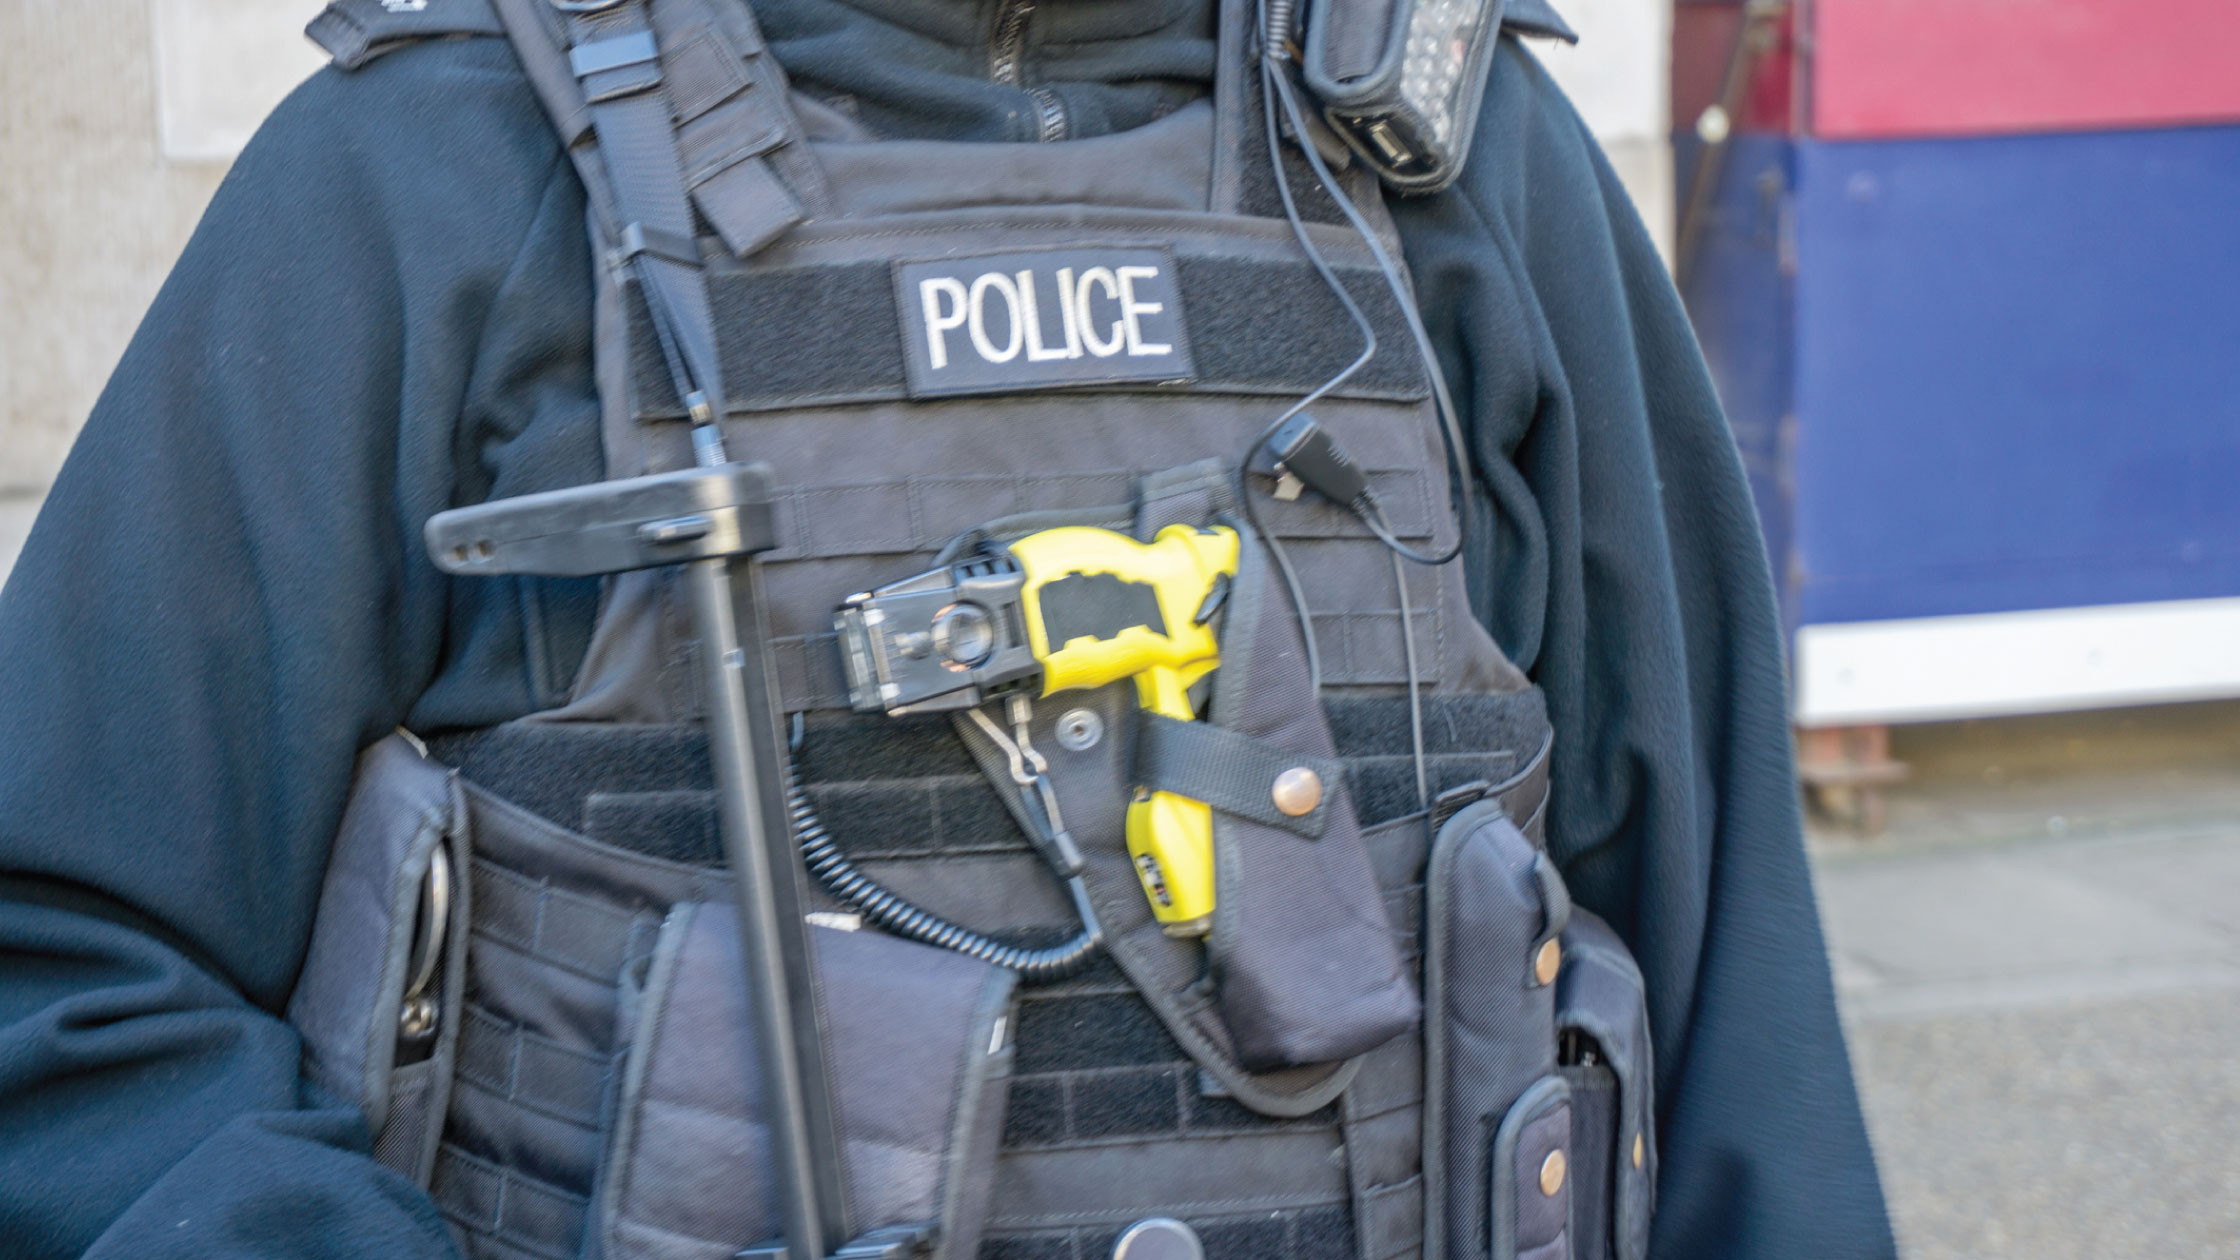 1 Law Enforcement Tech Stock Investors Can Buy and Hold